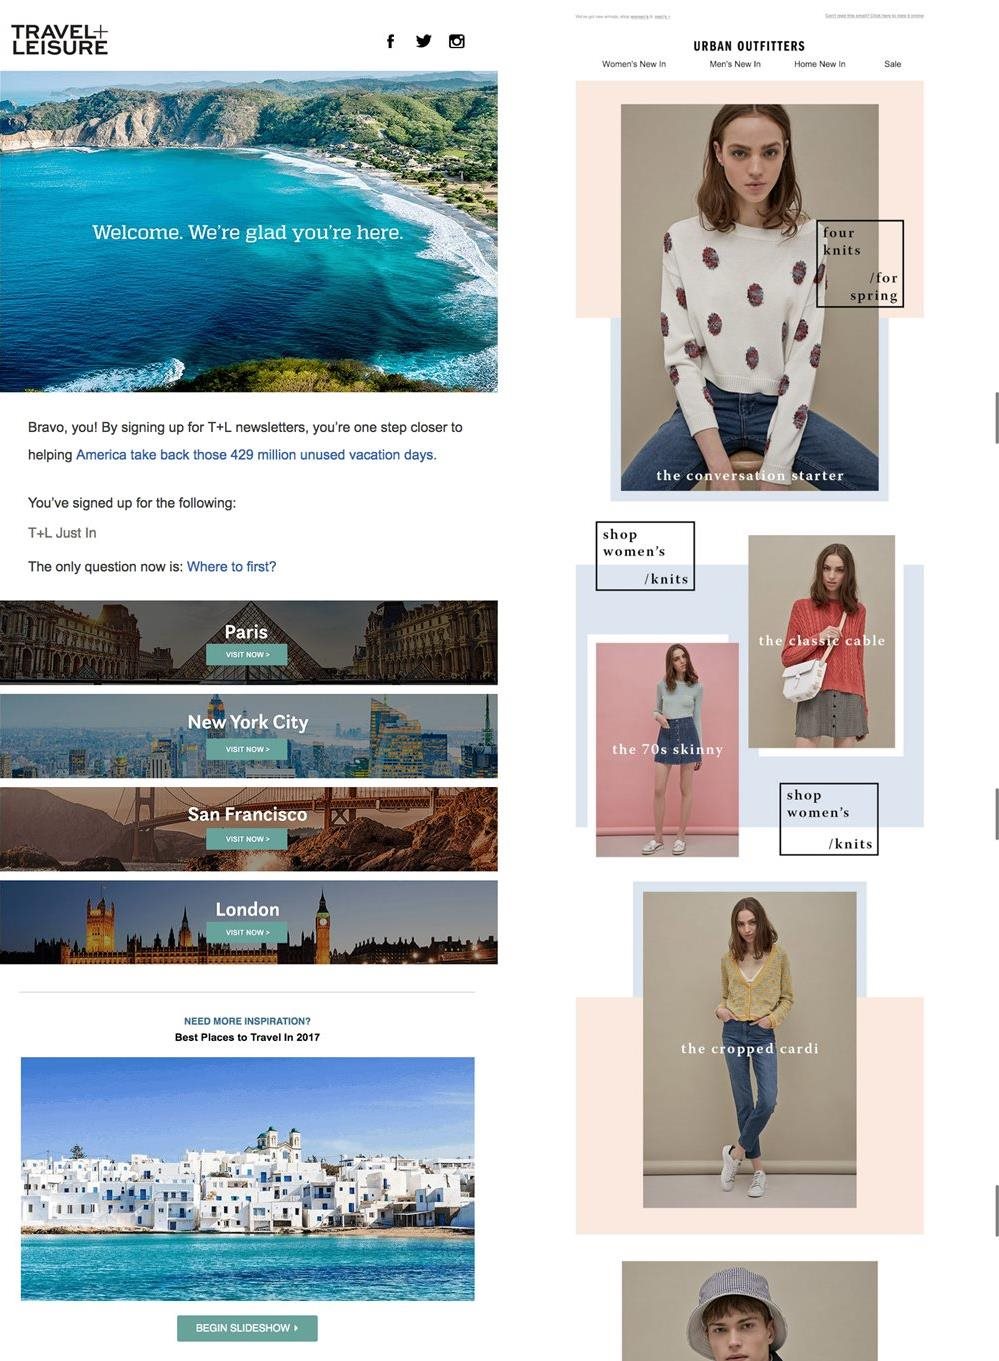 Travel + Leisure vs. Urban Outfitters email templates